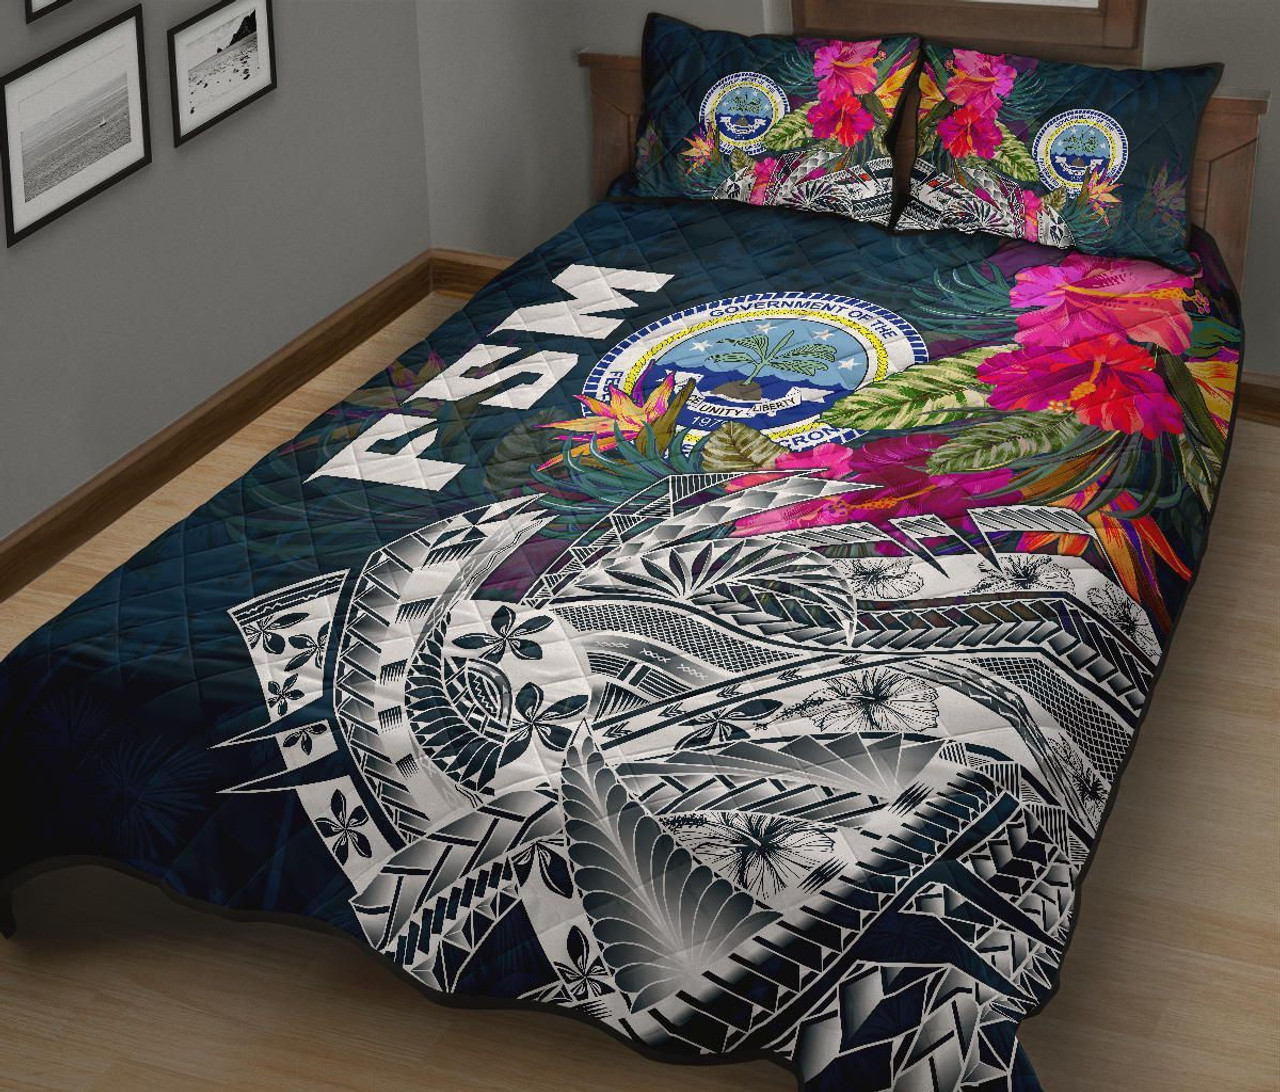 Federated States Of Micronesia Quilt Bed set - Summer Vibes 2